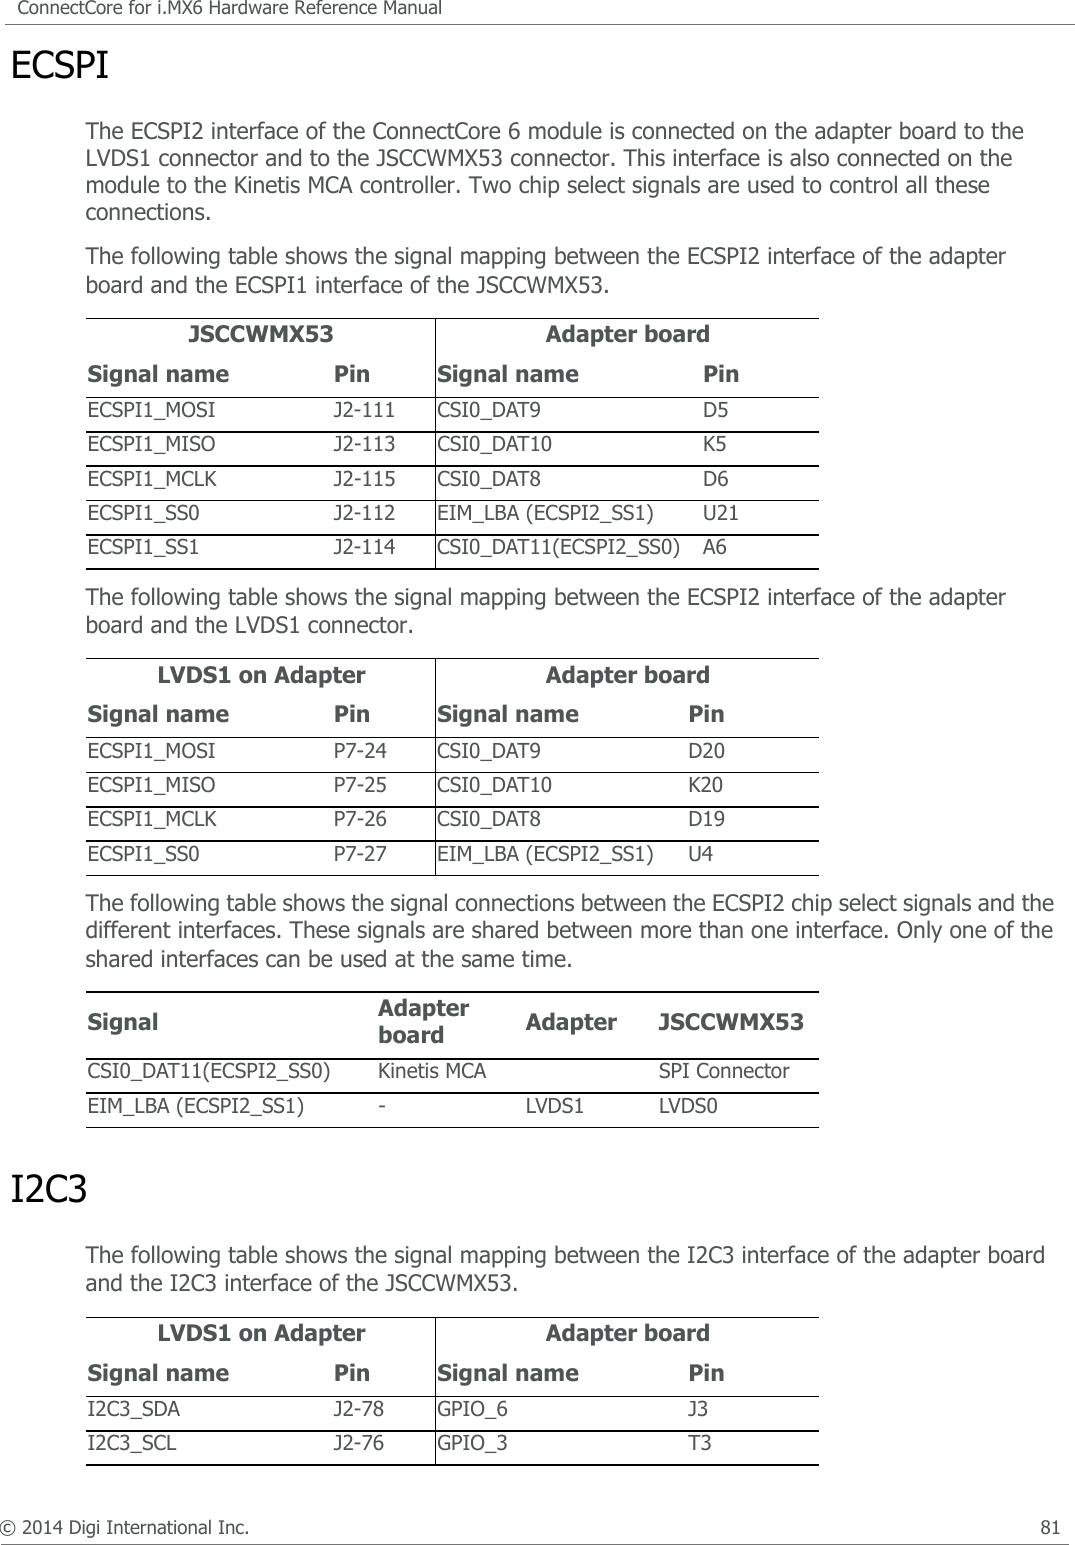 © 2014 Digi International Inc.      79ConnectCore for i.MX6 Hardware Reference ManualUSB HostThe JSCCWMX53 has a USB Hub connected to the USB Host interface. The following table shows the signals mapping between the USB Host interface of the adapter board and the USB Host interface of the JSCCWMX53.USB OTGThe JSCCWMX53 has a USB OTG interface with a reduced number of signals. The over current (USB_OTG_OC) and power enable (USB_OTG_PWR) signals are not used.The following table shows the signals used in the JSCCWMX53 for the USB OTG interface and the mapping of these signals on the module.SD2The following table shows the signal mapping between the SD2 interface of the adapter board and the SD3 interface of the JSCCWMX53.Note:  The microSD interface on the JSCCWMX53 does not have card detect and write protect signals.JSCCWMX53 Adapter boardSignal name Pin Signal name PinUSB_H1_DN J2-131 USB_H1_DN C16USB_H1_DP J2-129 USB_H1_DP D16USB_HUB_RESET_N J1-4 EIM_DA10 V21JSCCWMX53 Adapter boardSignal name Pin Signal name PinUSB_OTG_DN J2-73 USB_OTG_DN G16USB_OTG_DP J2-71 USB_OTG_DP G17USB_OTG_ID J2-70 GPIO_1 K3USB_OTG_VBUS J2-72 USB_OTG_VBUS G14JSCCWMX53 Adapter boardSignal name Pin Signal name PinSD3_CLK J2-170 SD2_CLK K22SD3_CMD J2-169 SD2_CMD M20SD3_DATA0 J2-153 SD2_DATA0 P24SD3_DATA1 J2-156 SD2_DATA1 K21SD3_DATA2 J2-155 SD2_DATA2 R24SD3_DATA3 J2-158 SD2_DATA3 K23